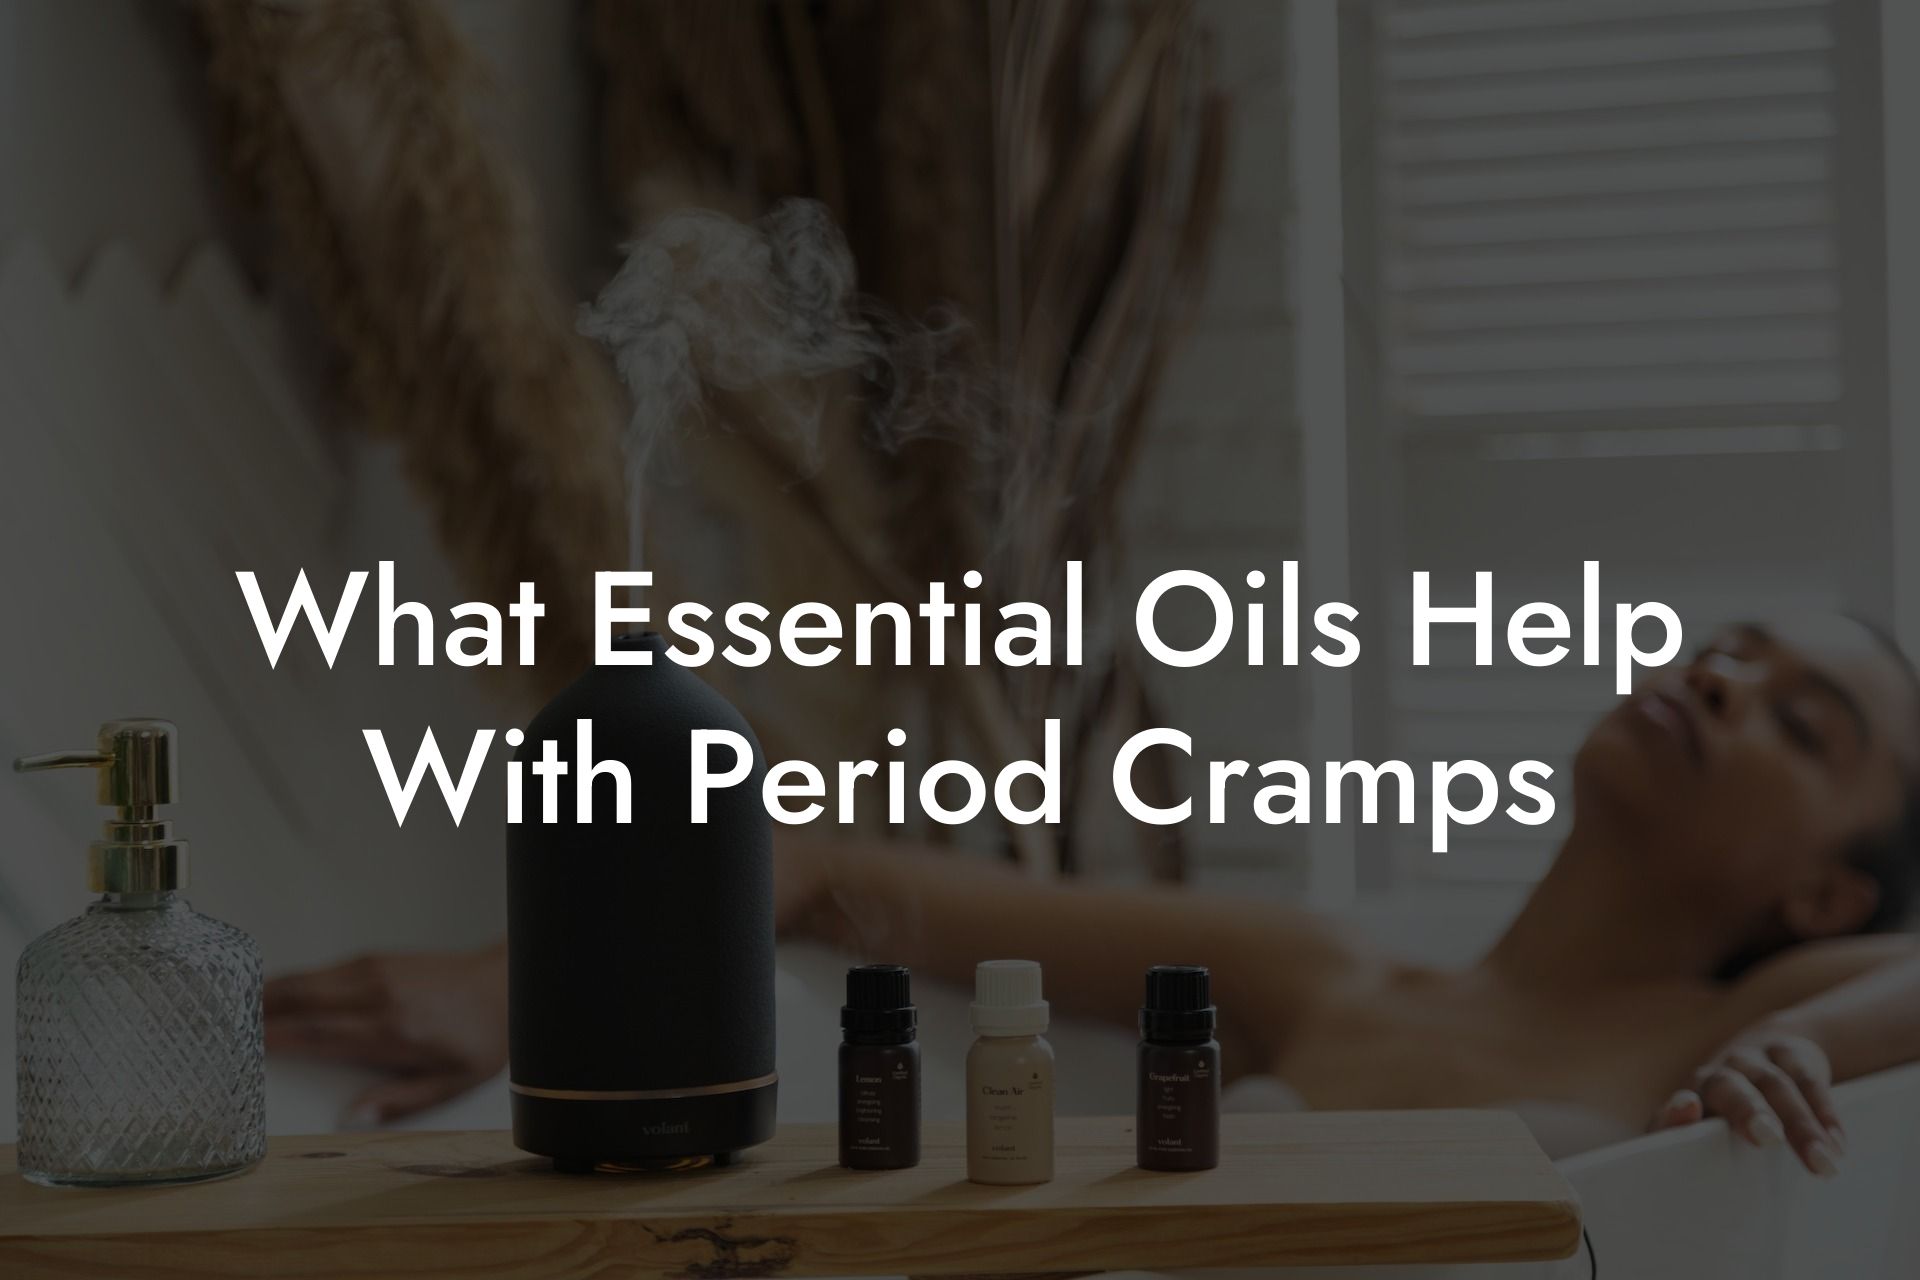 What Essential Oils Help With Period Cramps